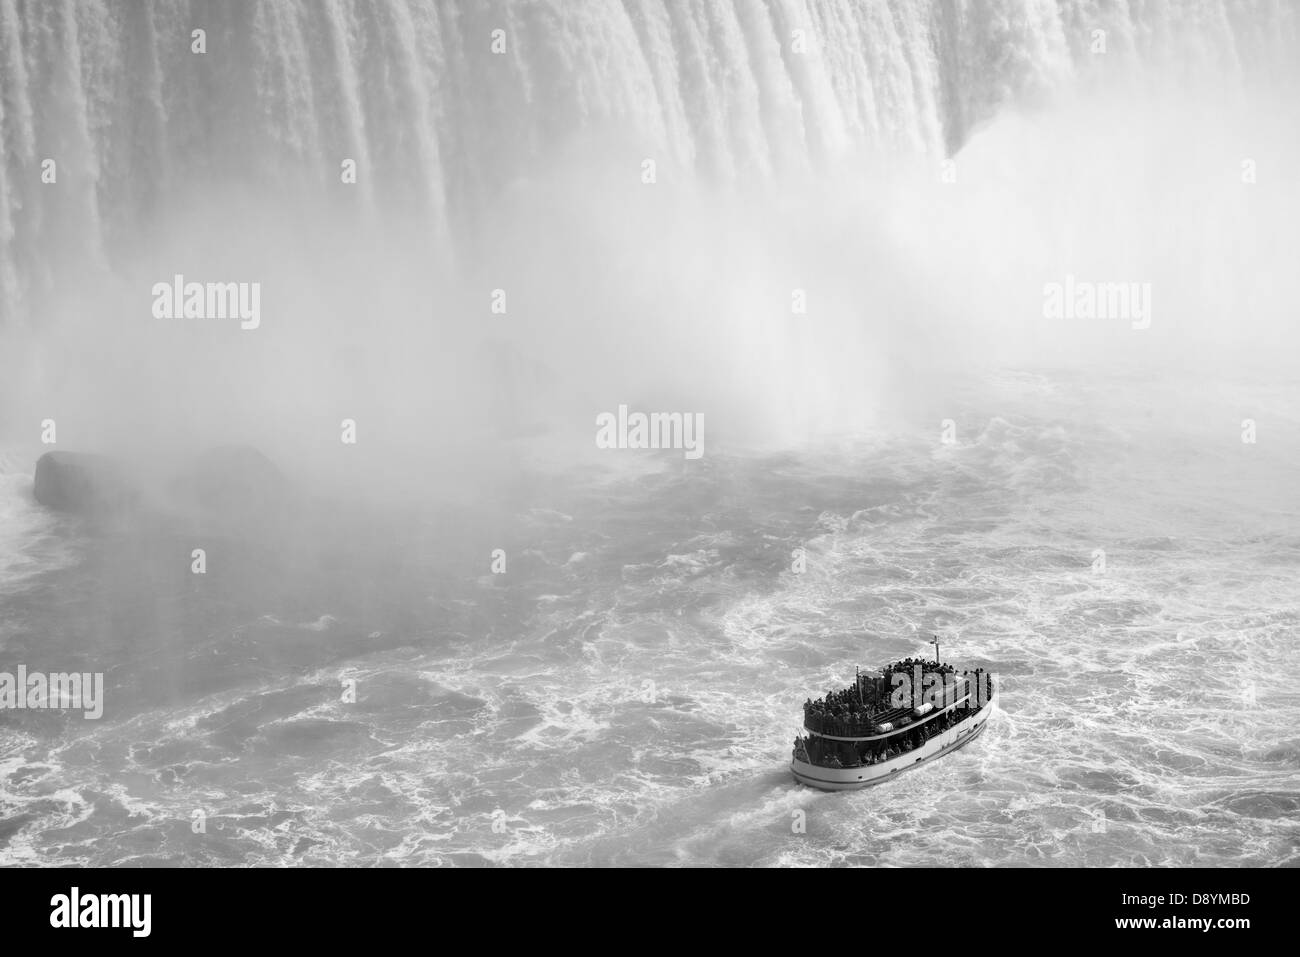 Boat and Horseshoe Falls from Niagara Falls in black and white Stock Photo